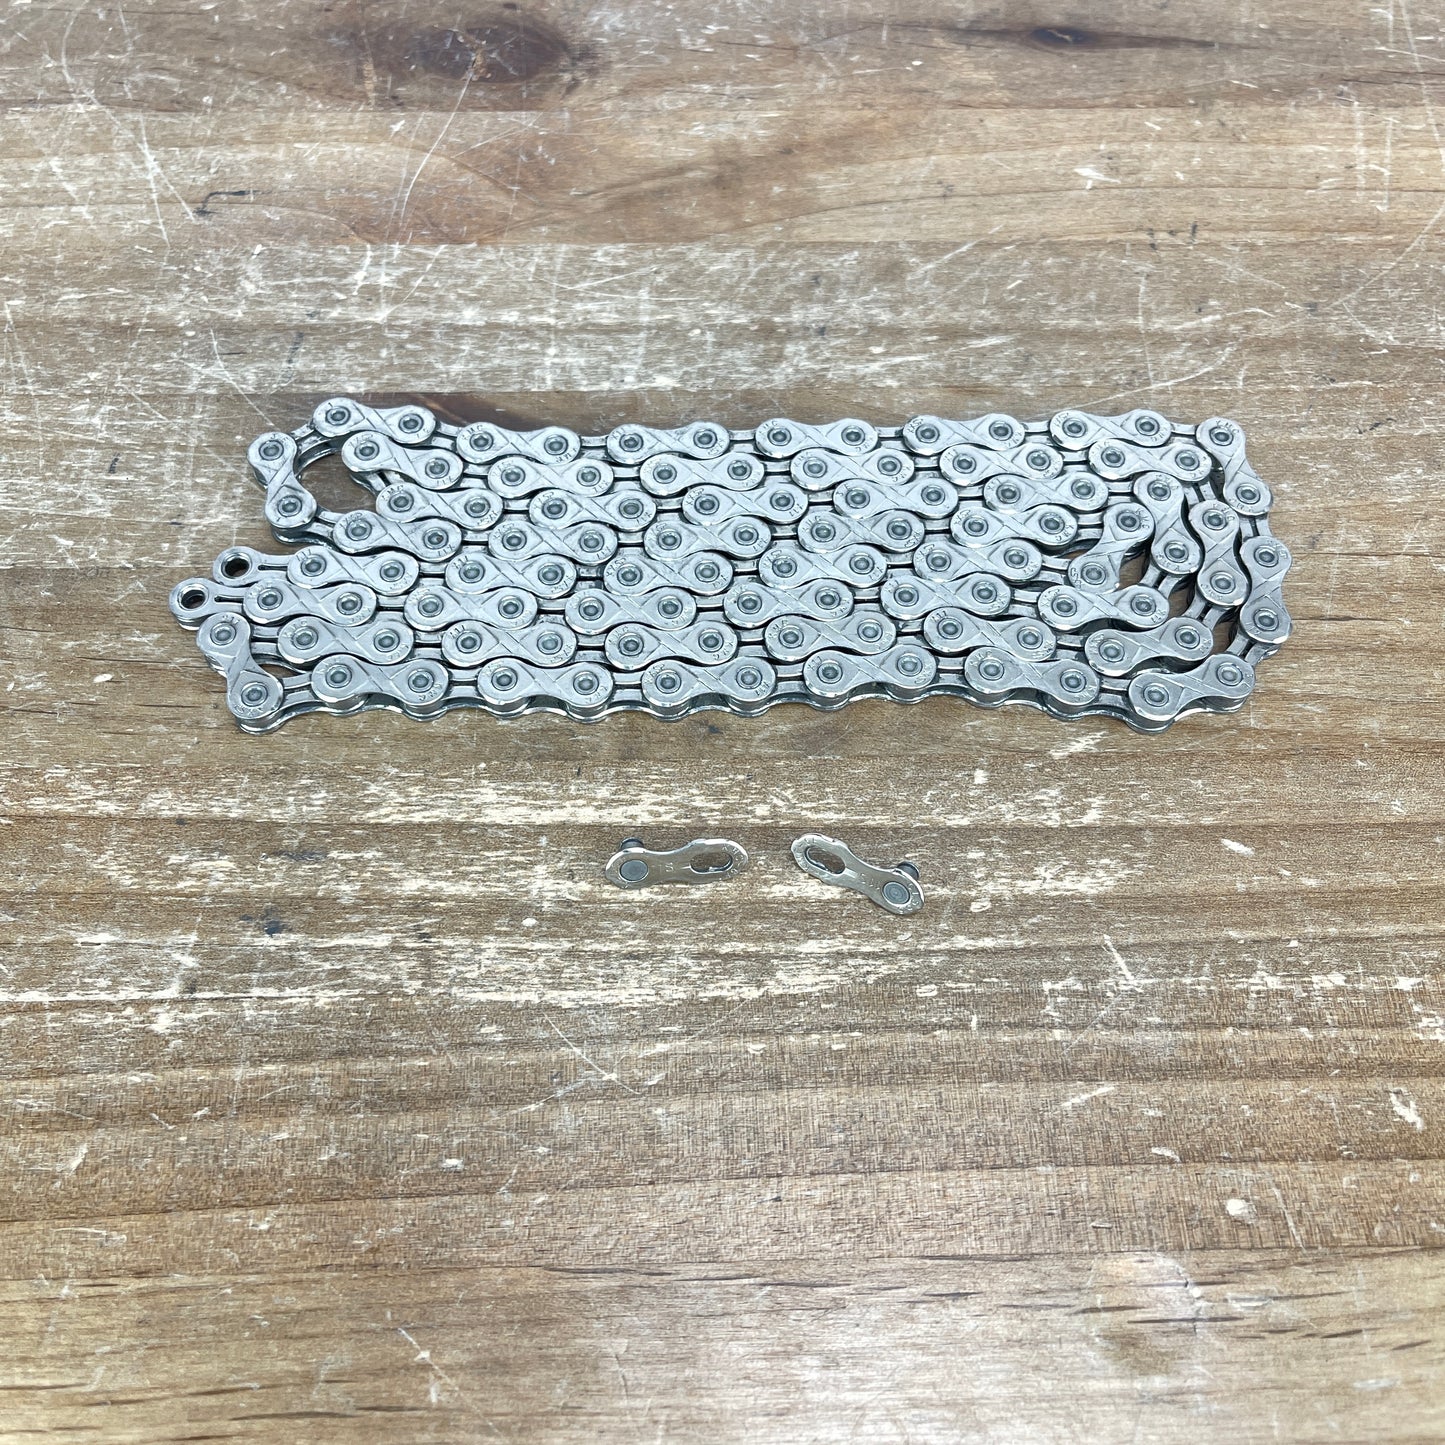 Low Mile KMC X11 11-Speed Bike Chain - Various Lengths Available